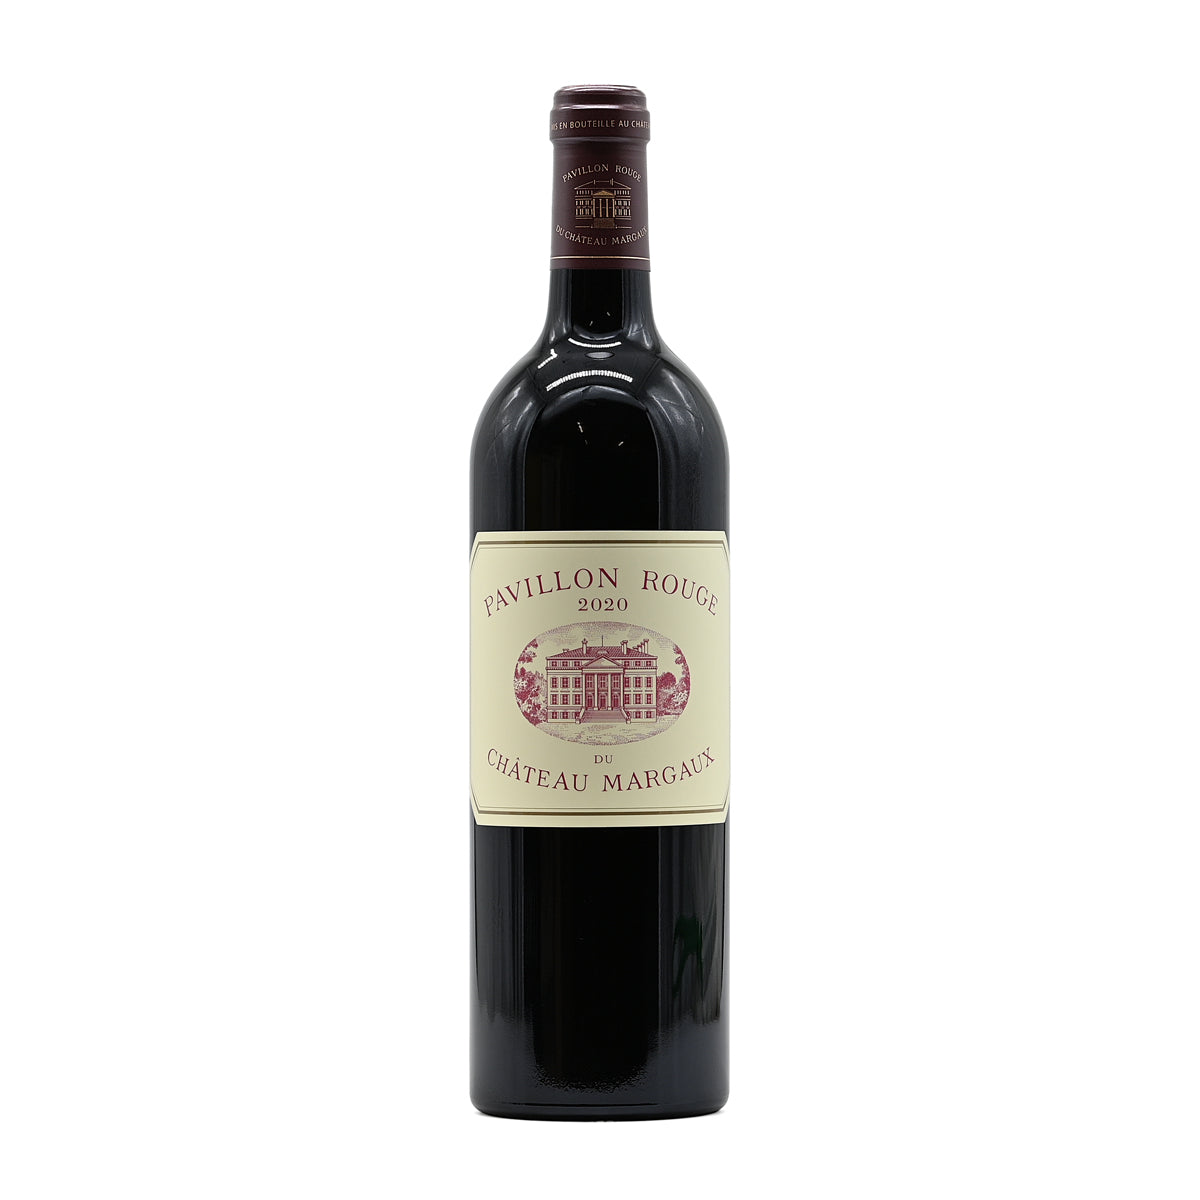 Pavillon Rouge du Château Margaux 2020, 750ml French red wine, made from a blend of Cabernet Sauvignon, Merlot, Cabernet Franc, and Petit Verdot ; from Margaux, Bordeaux, France – GDV Fine Wines, Hong Kong